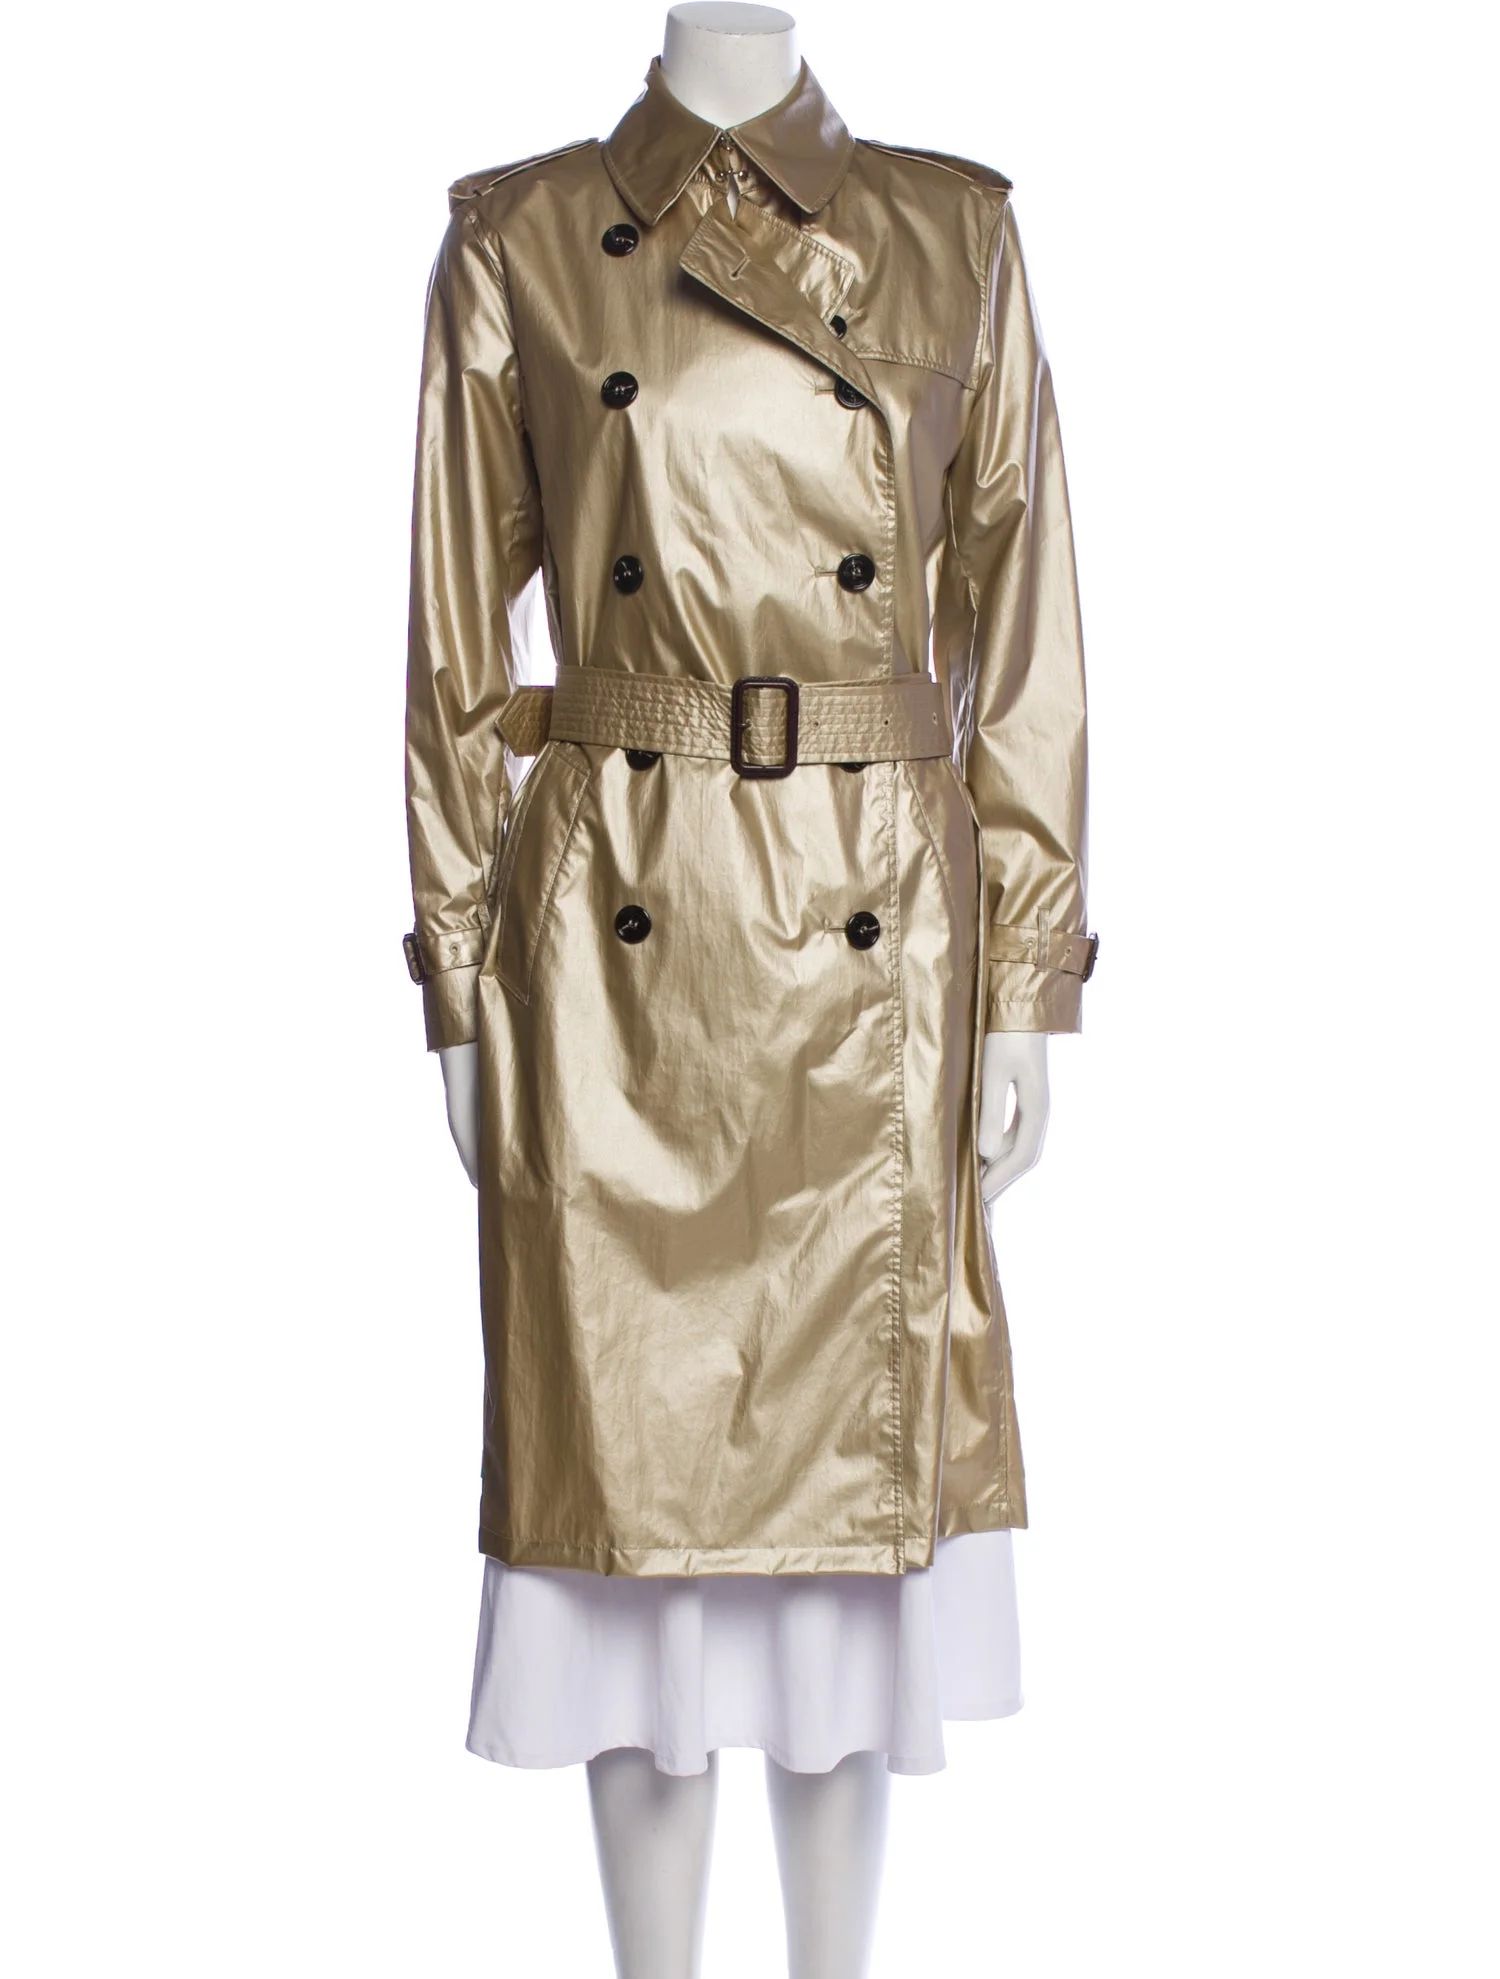 Burberry London Trench Coat | The RealReal